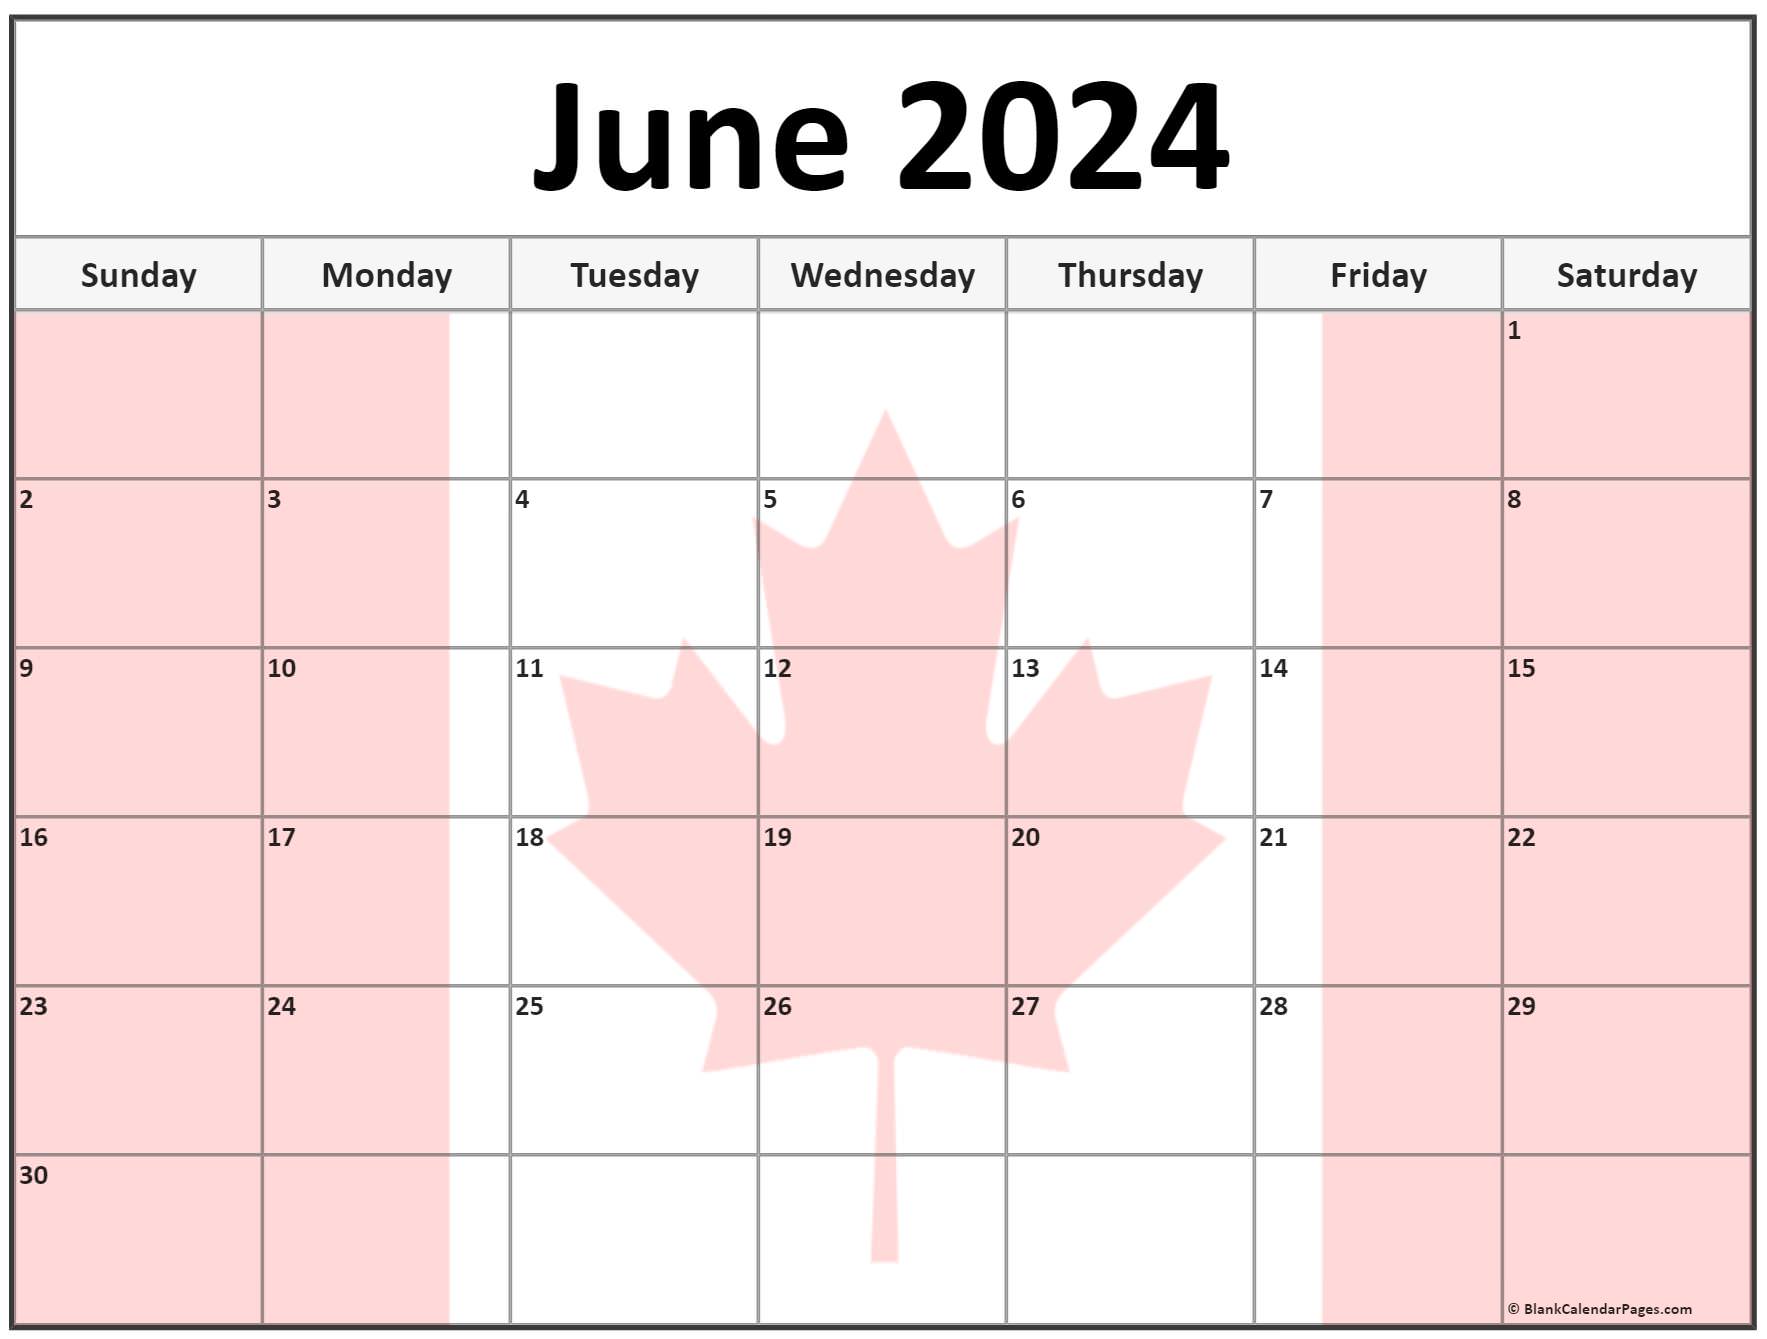 Collection of June 2024 photo calendars with image filters.